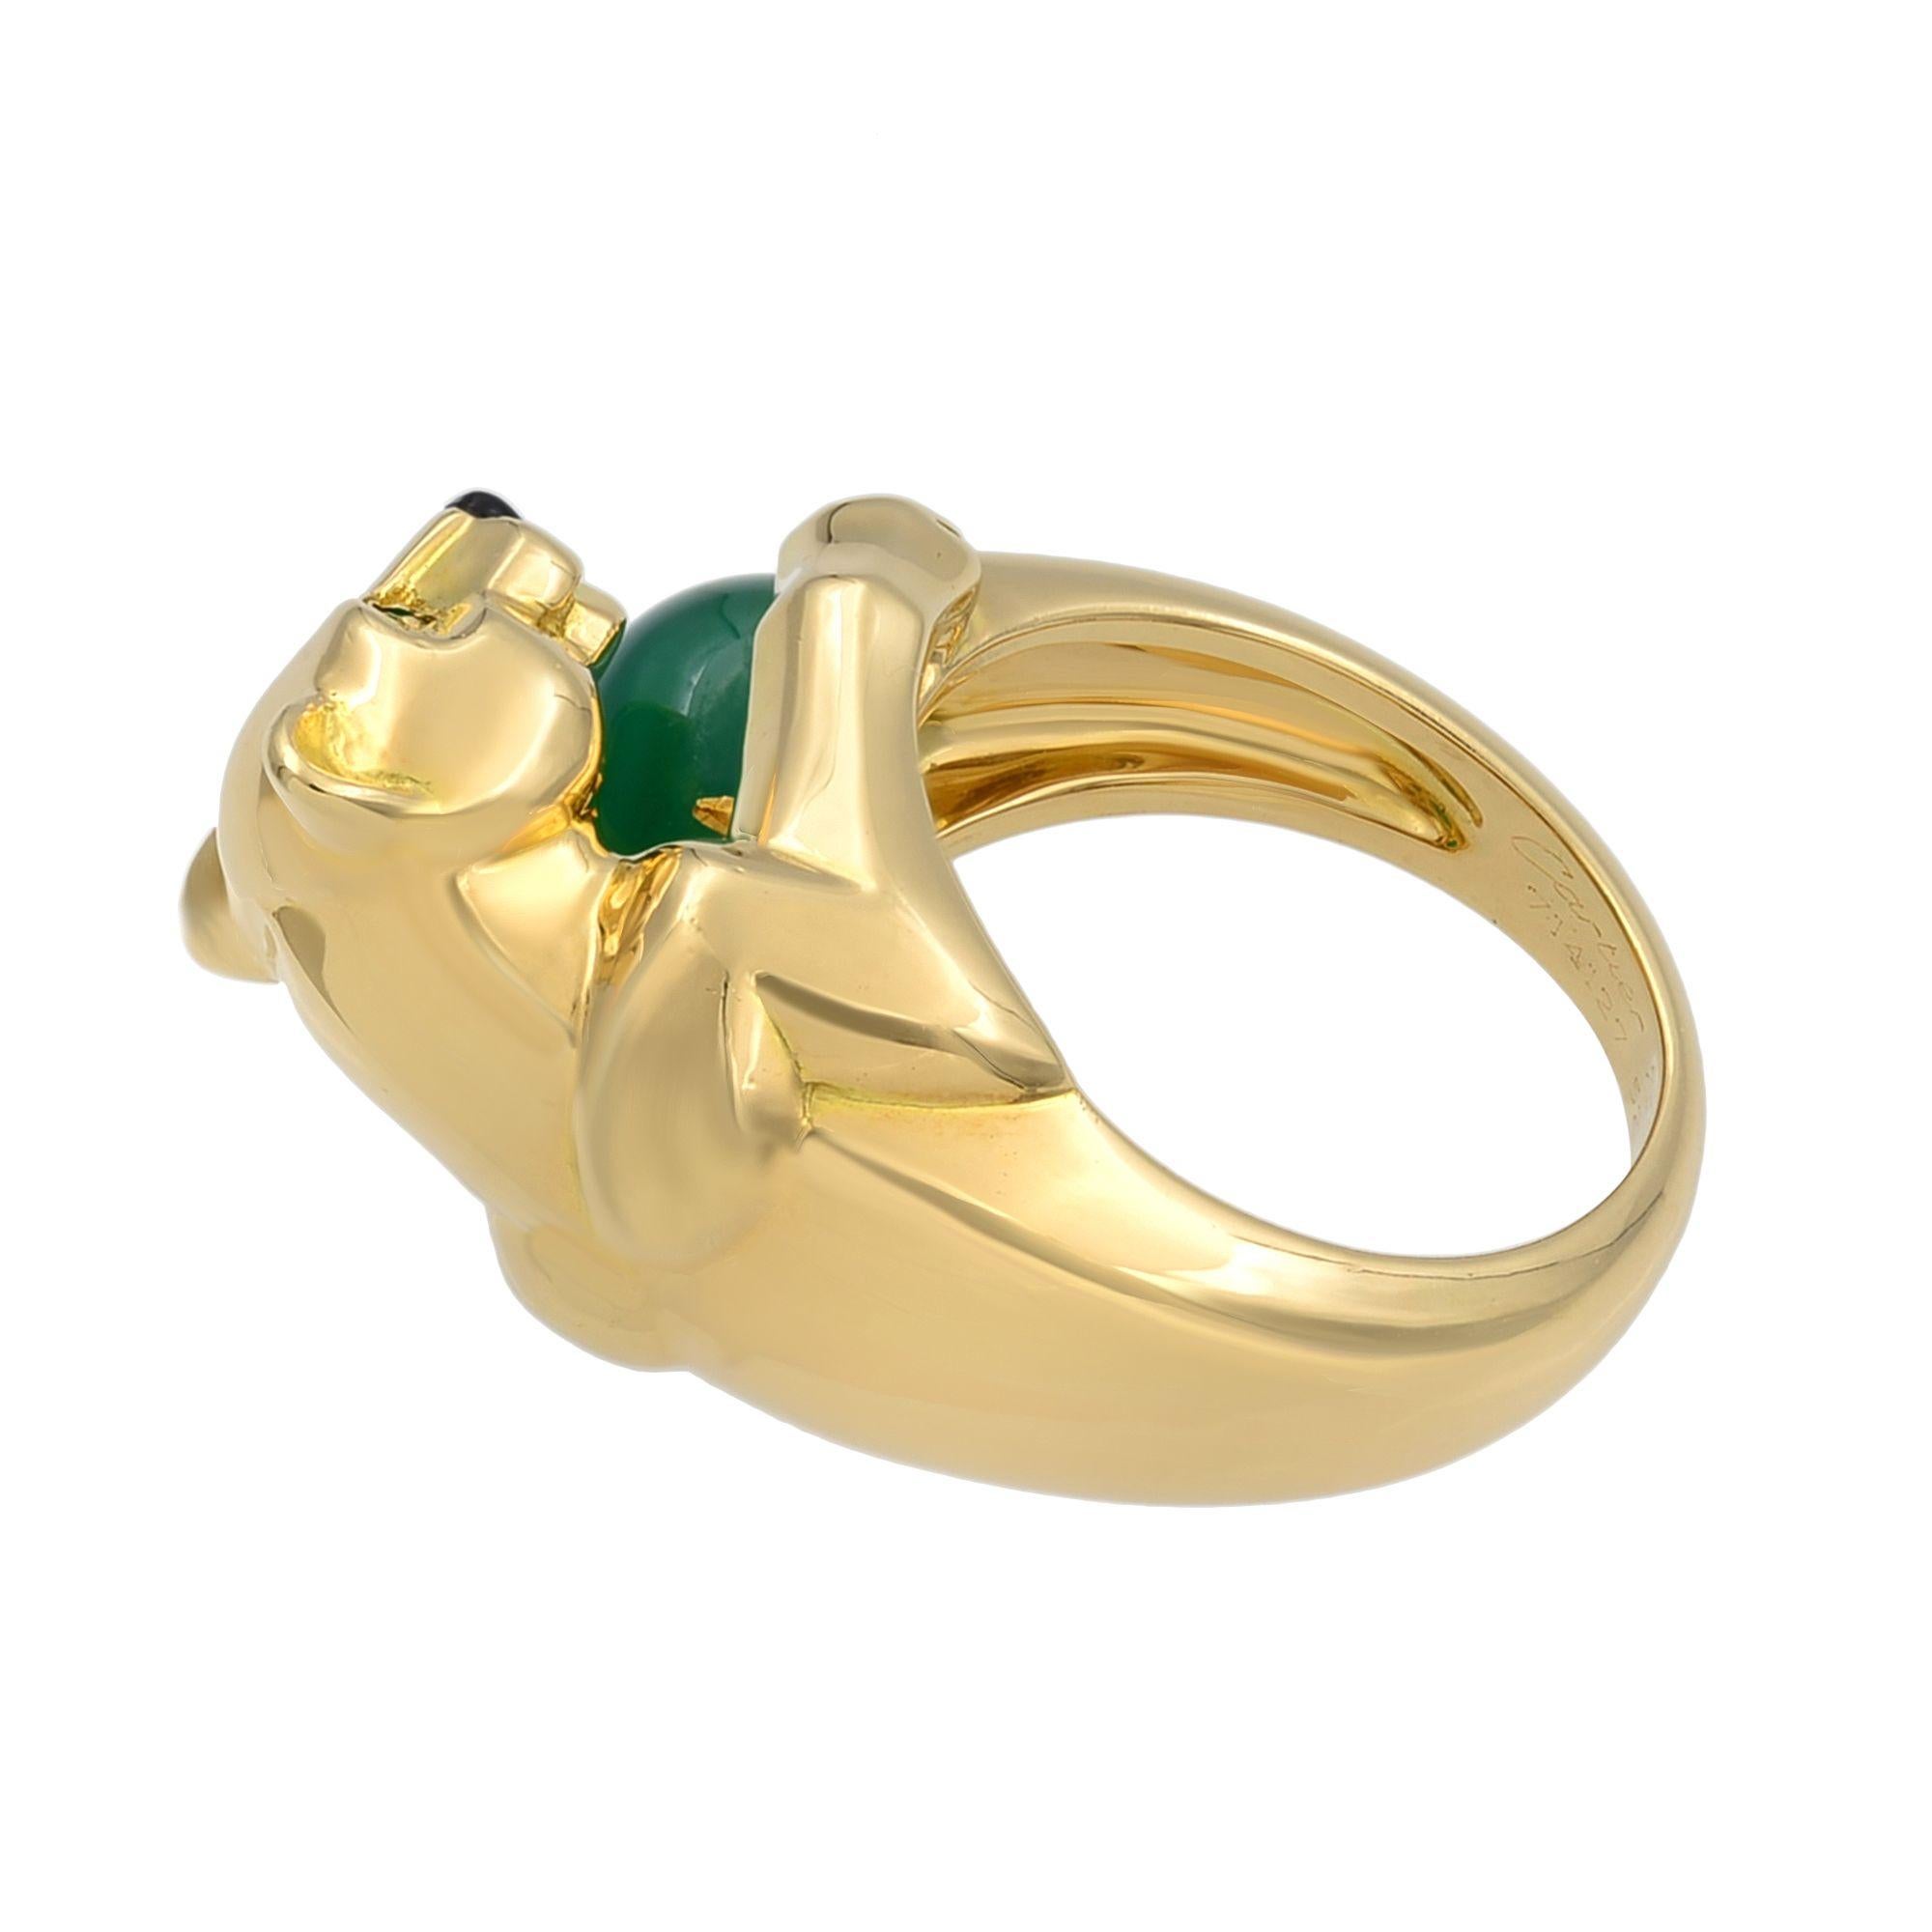 Cartier Panthere ring, set in solid 18k yellow gold. This rare version of Panthère de Cartier ring prominently features a polished yellow gold panther motif holding a beautiful polished green chalcedony bead. The panther is also set with matching